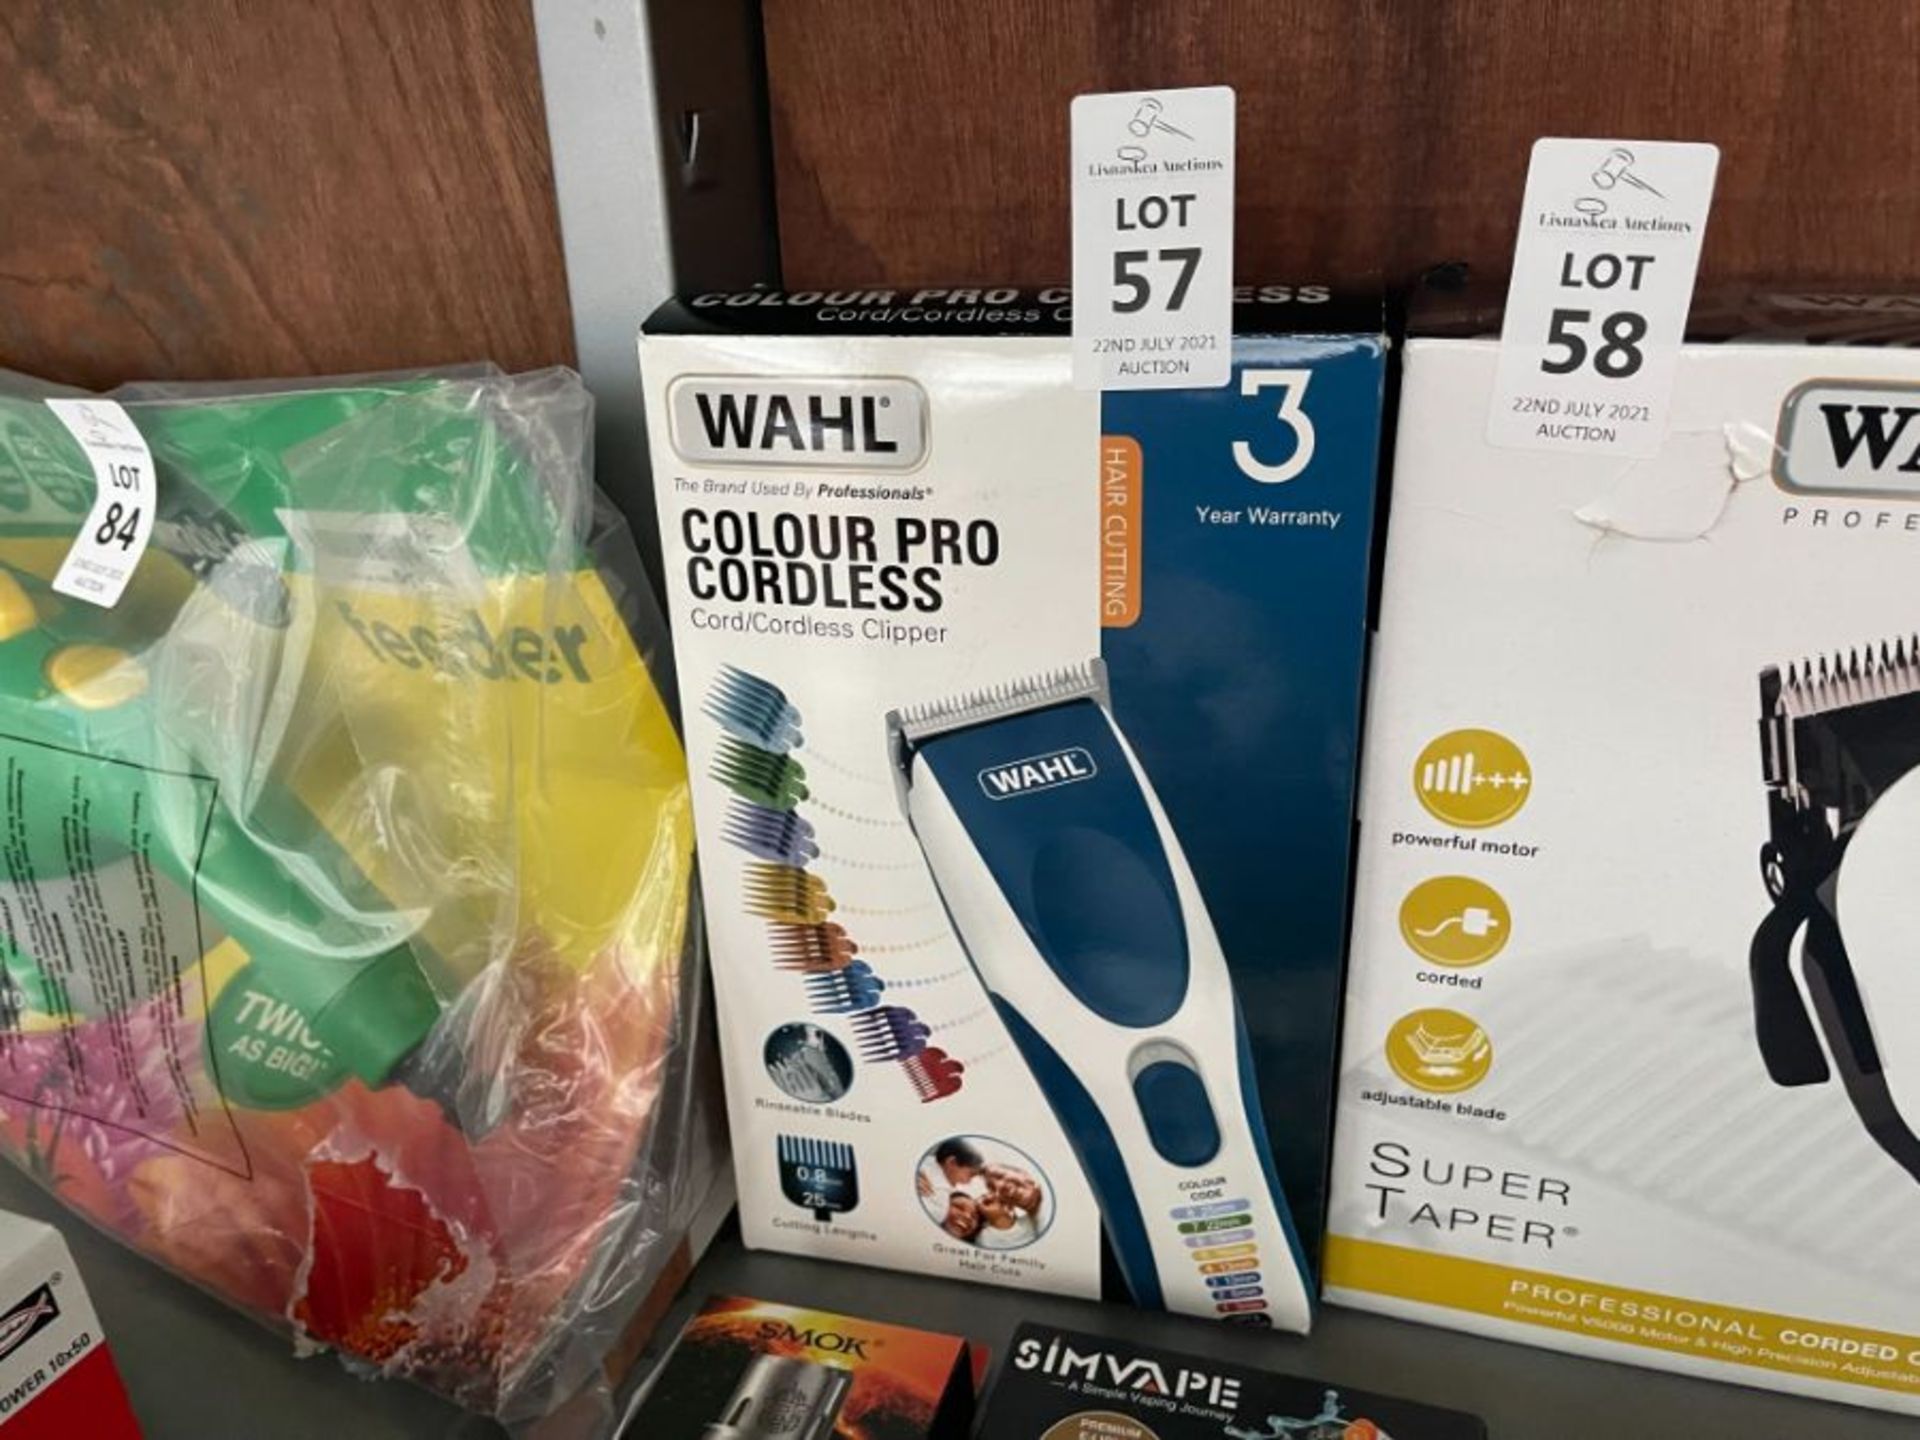 WAHL COLOUR PRO CORDLESS CLIPPER (WORKING)